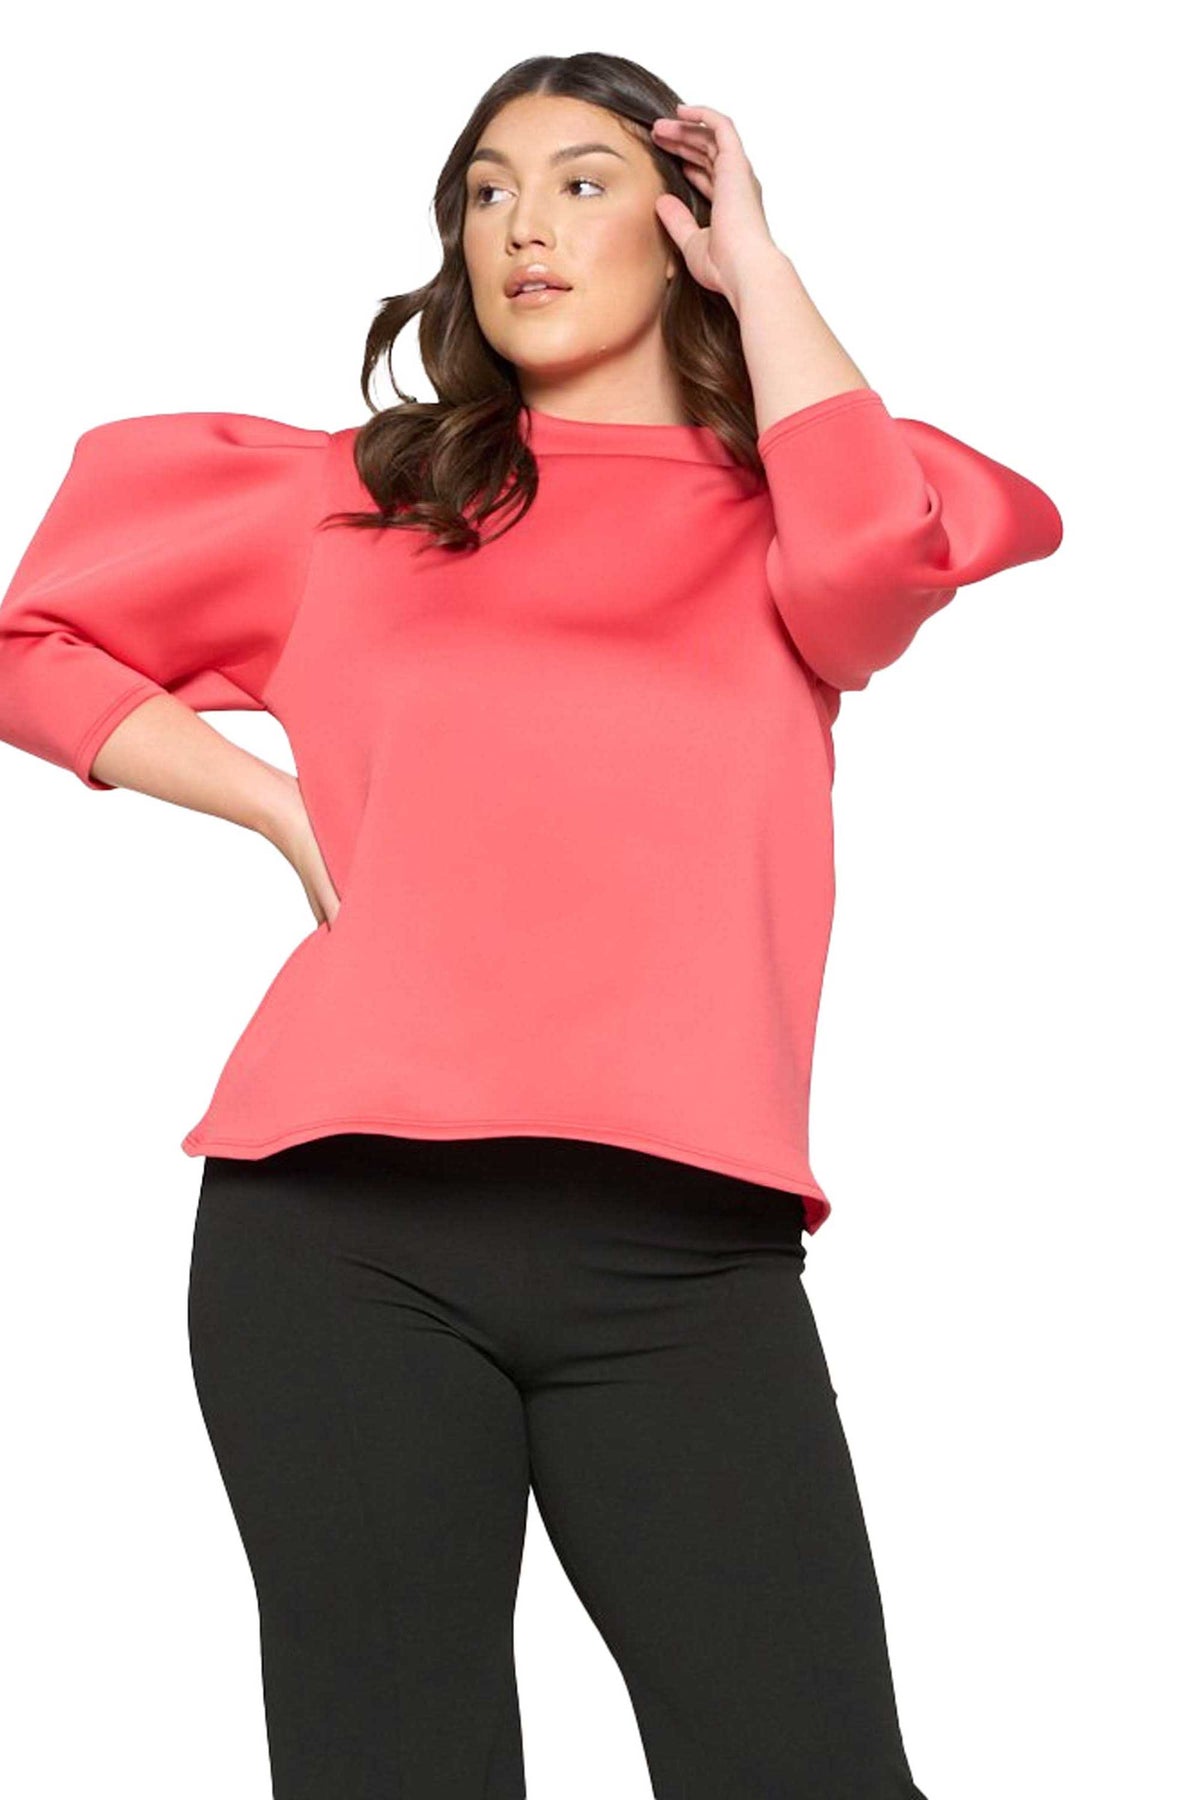 livd apparel plus size boutique neoprene statement sleeve top in strawberry